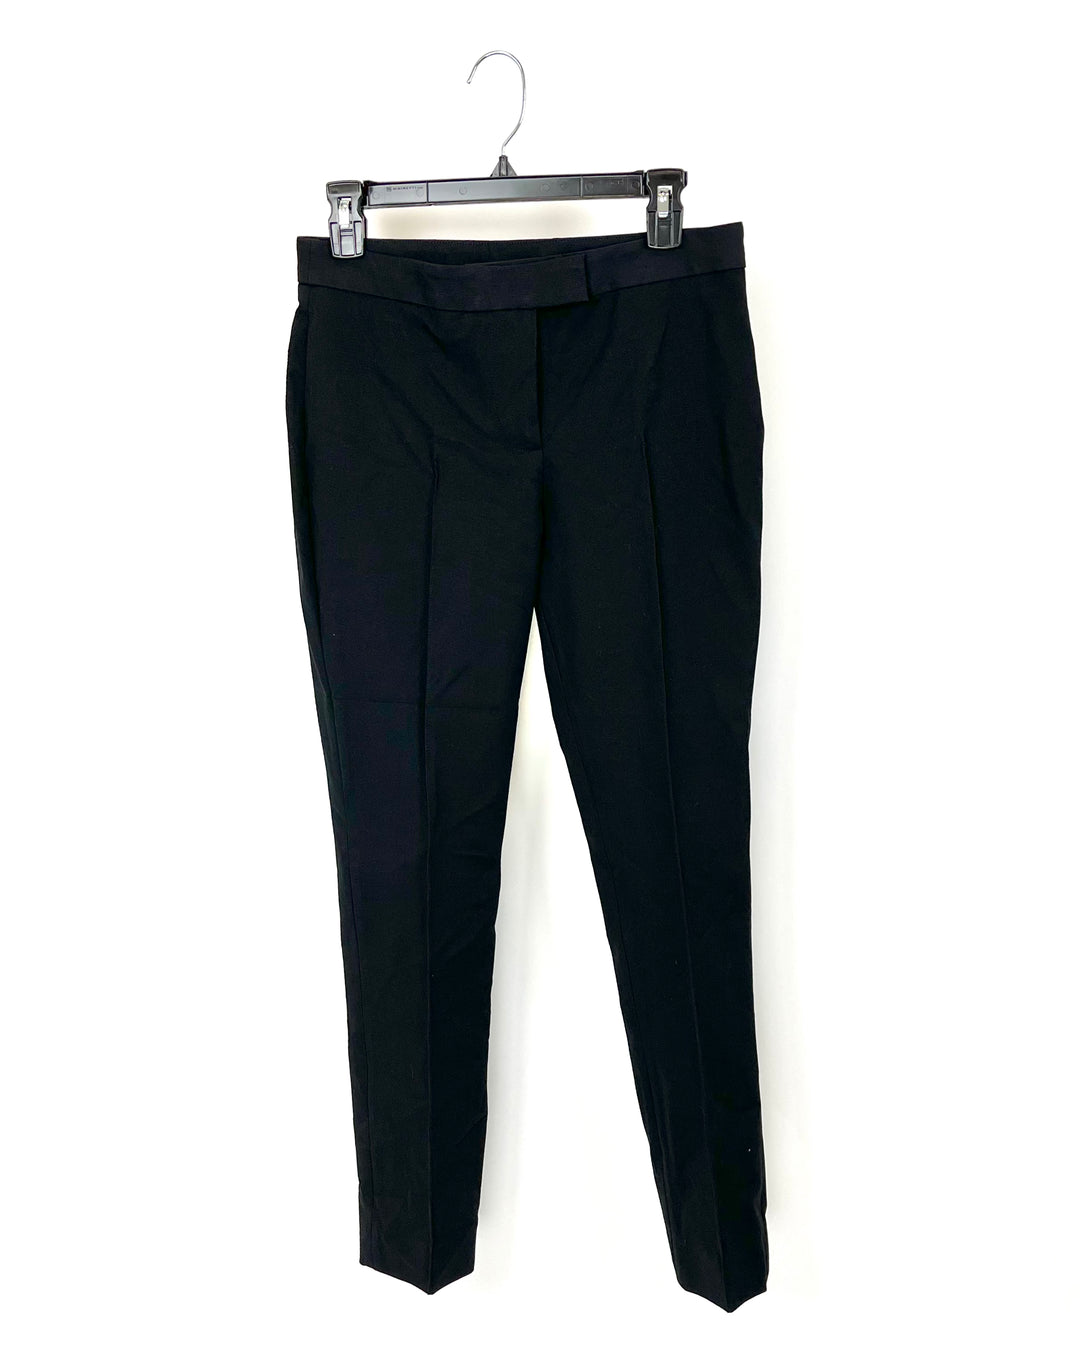 Black Trousers - Size 2 and 8